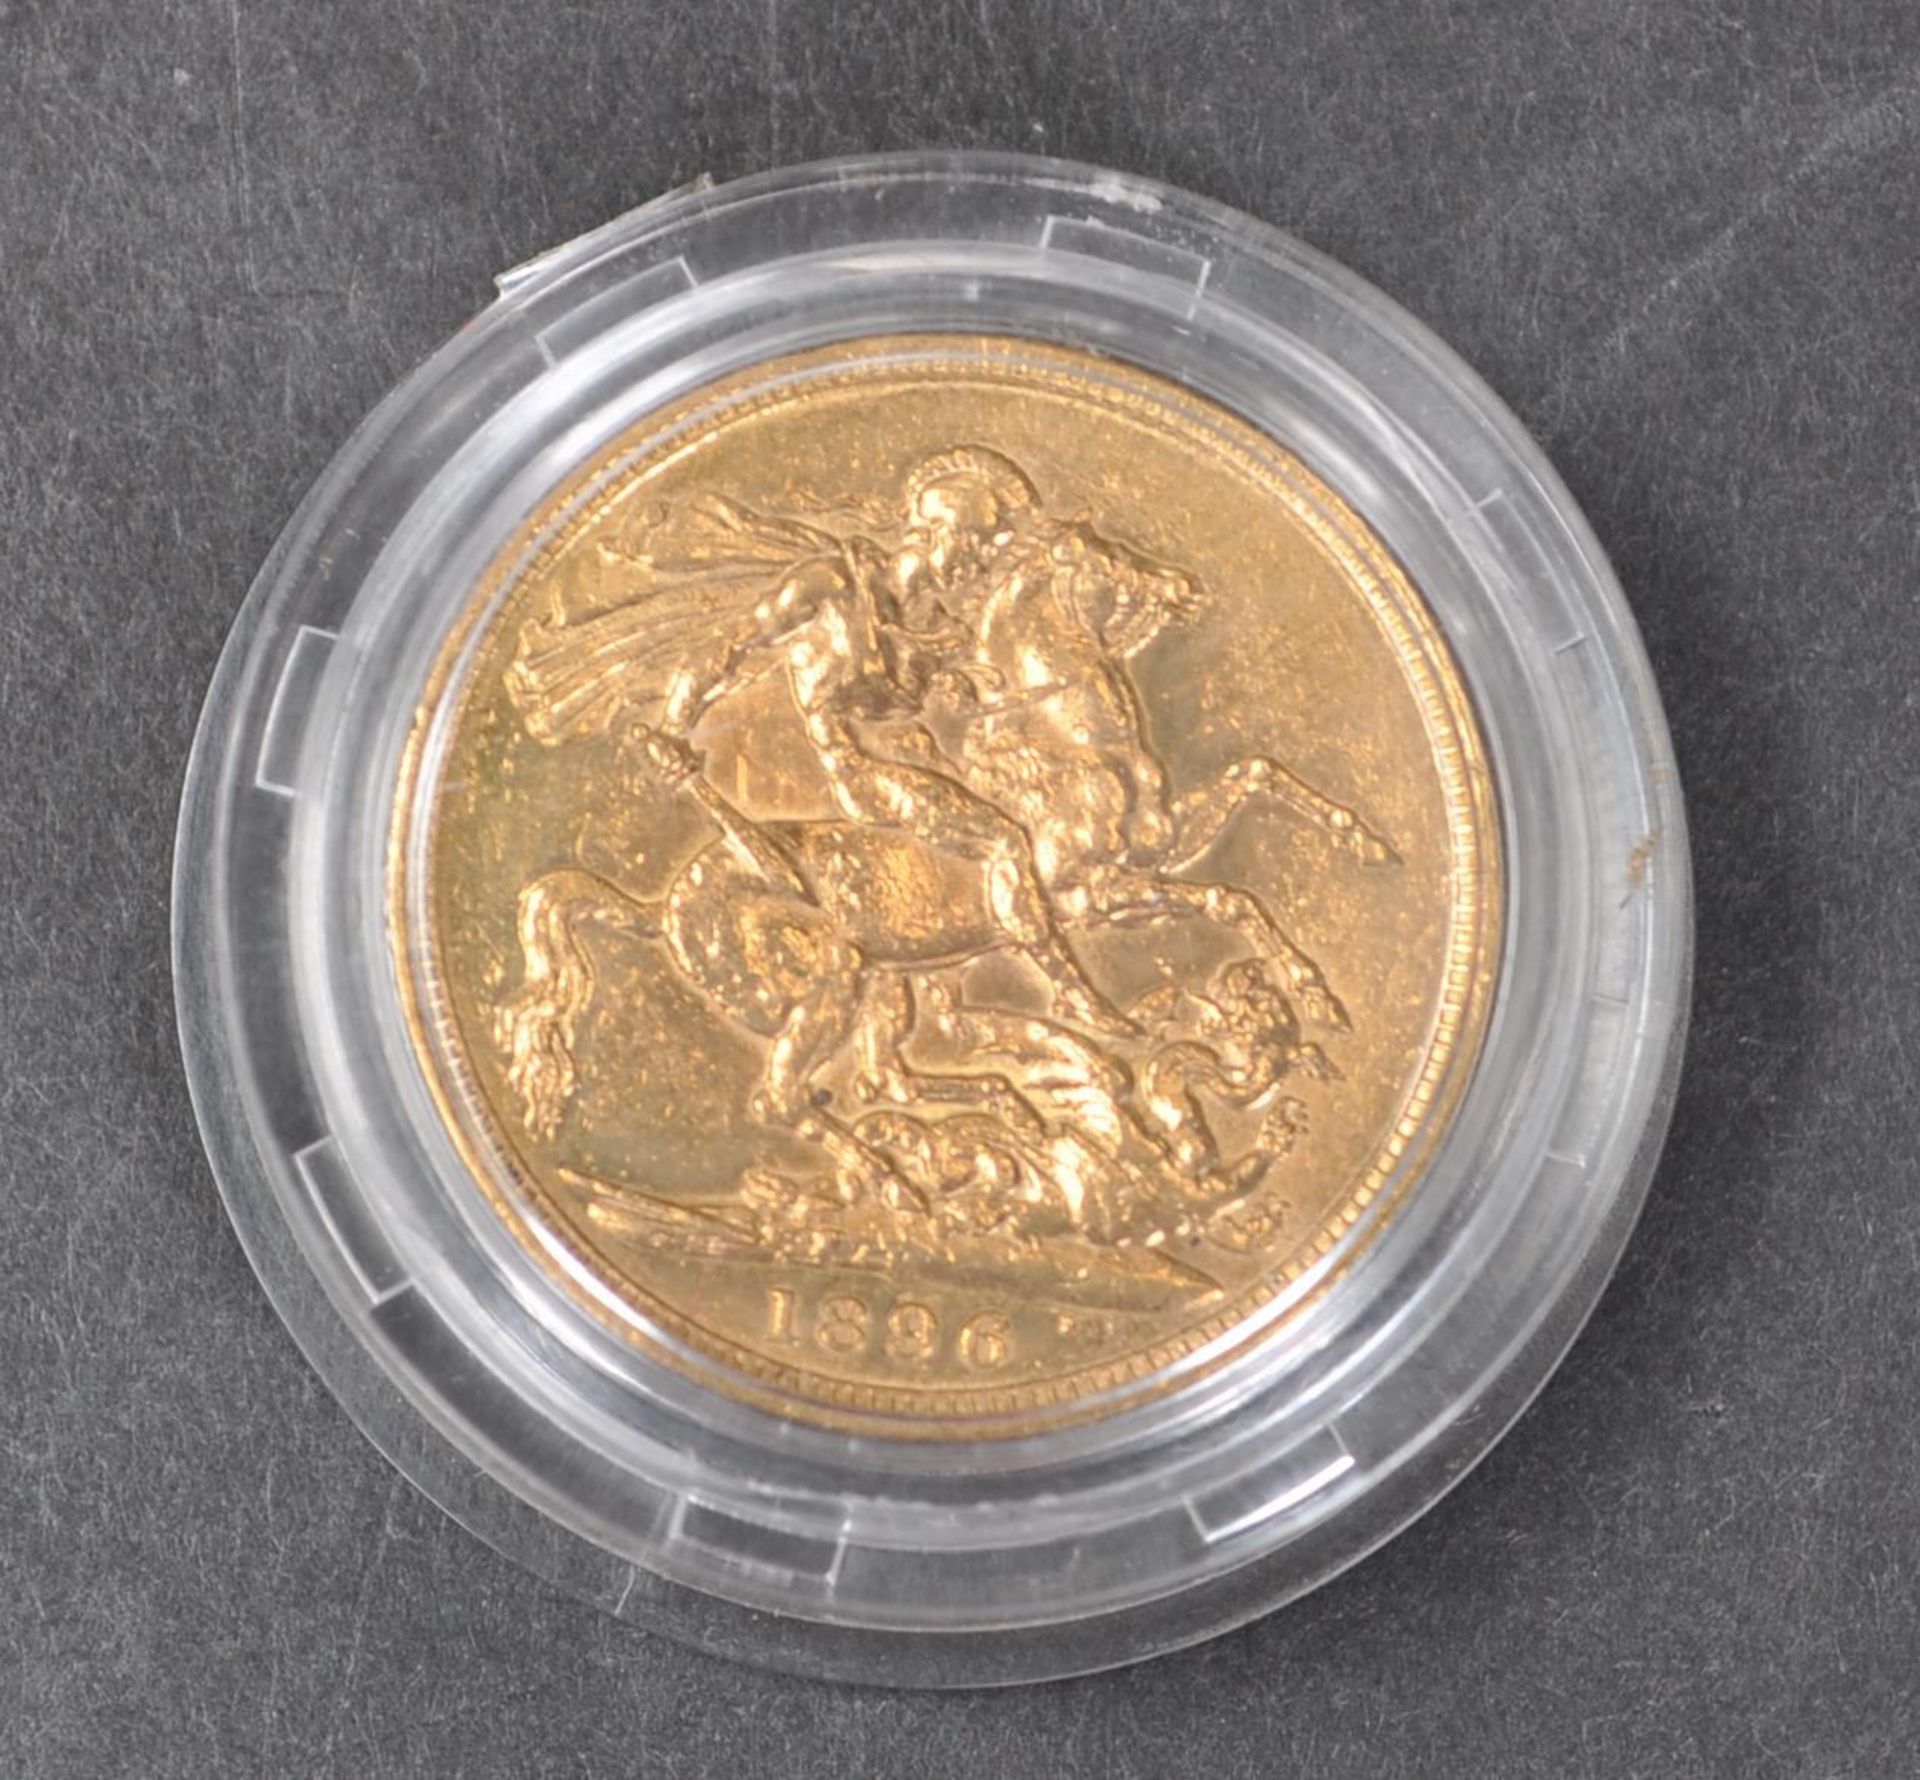 1896 VICTORIAN 22CT GOLD SOVEREIGN COIN - Image 2 of 2